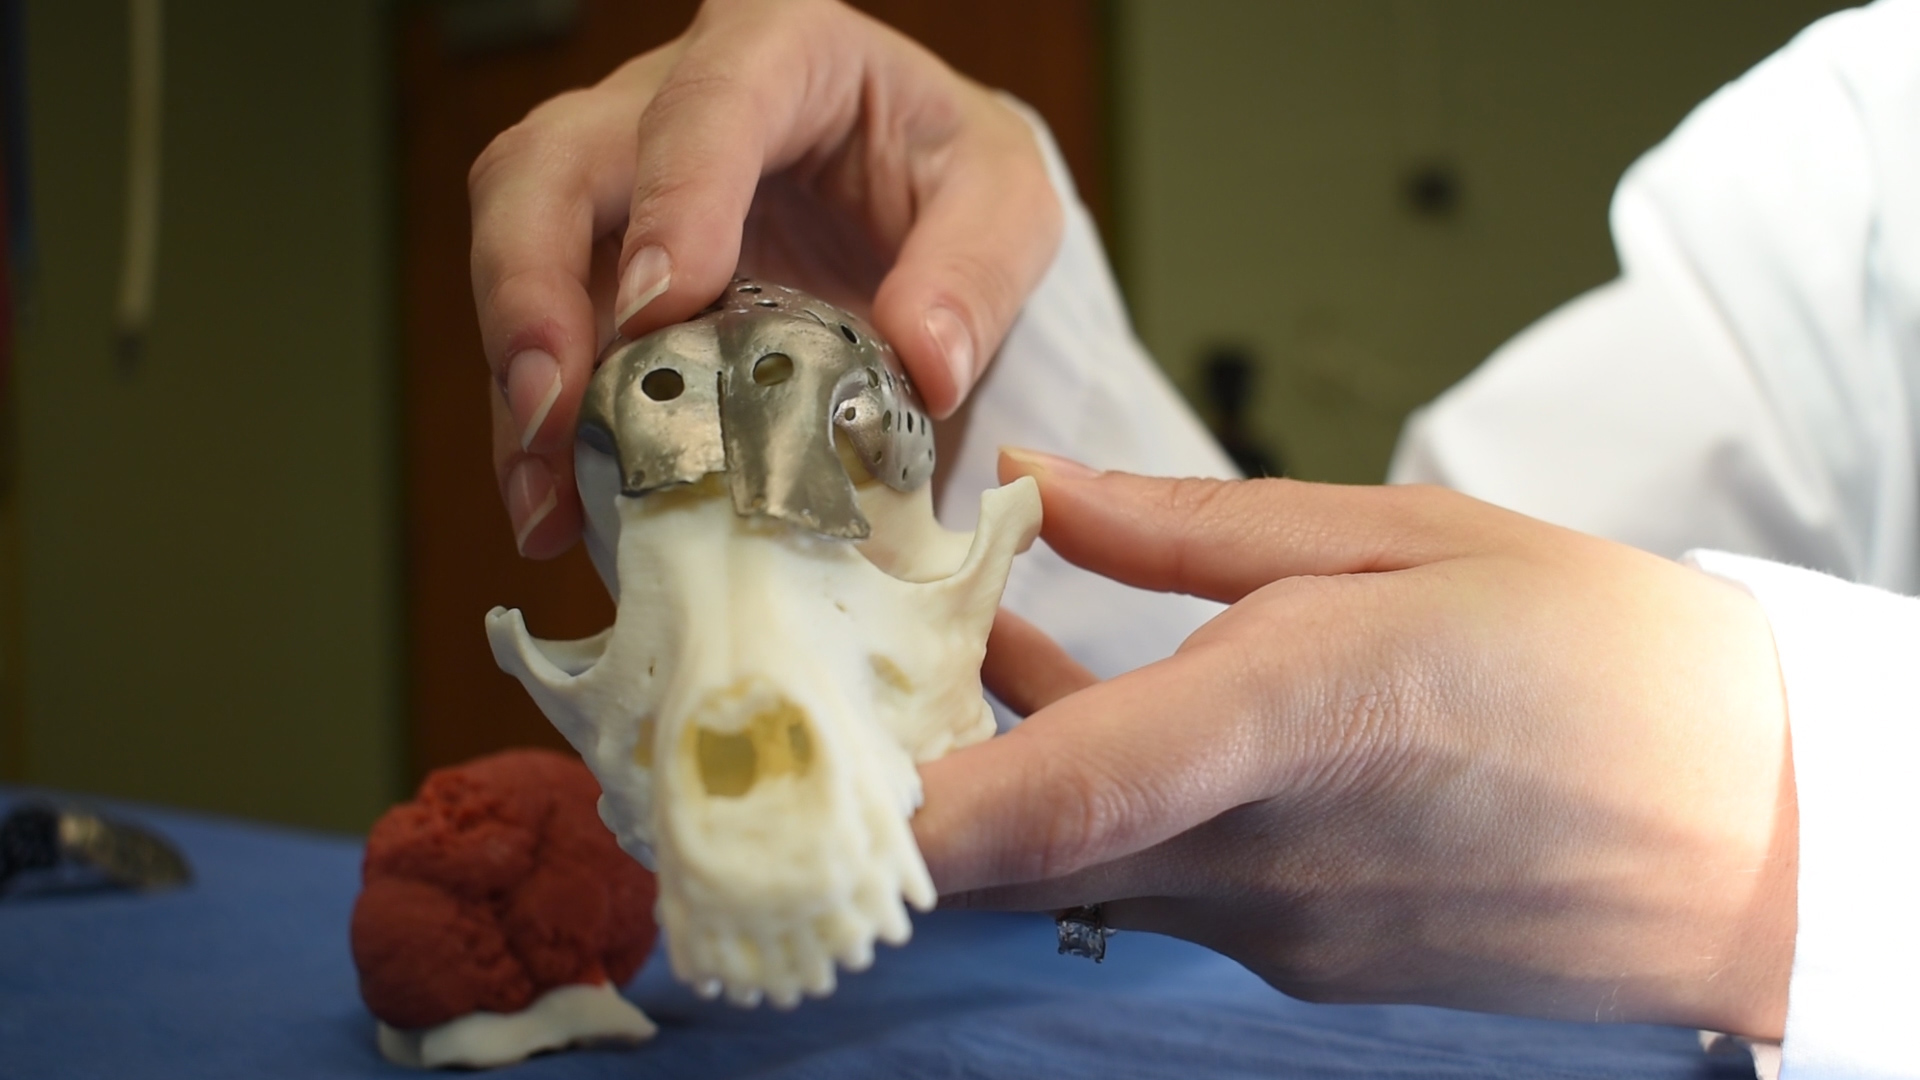 Veterinarian's hands showing how a piece of 3D printed skull pops into place on a model of a dog's skull